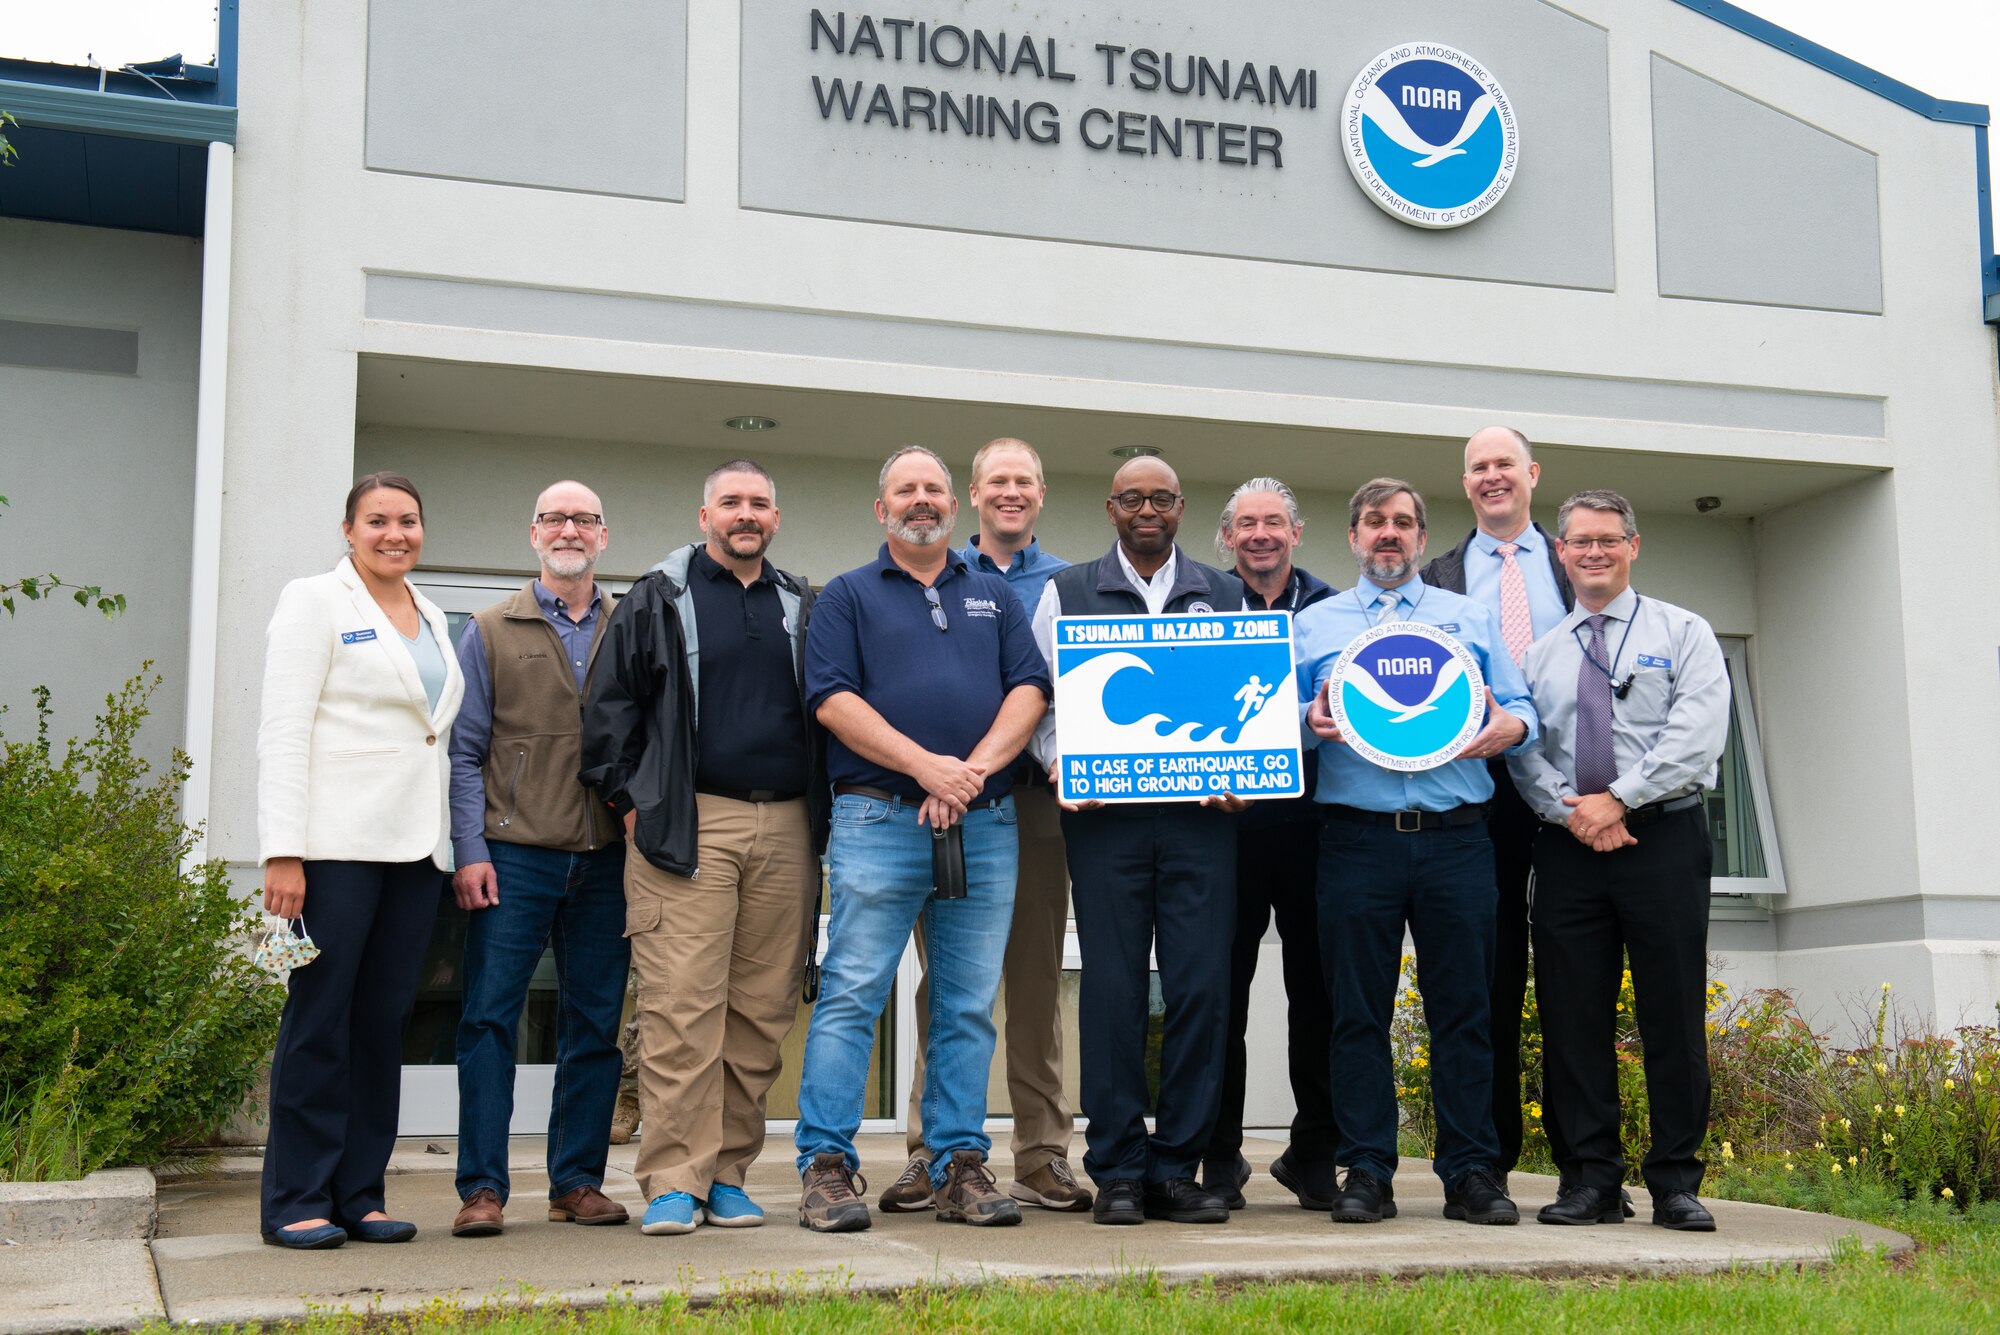 Members from the National Oceanic and Atmospheric Association, the Federal Emergency Management Agency, and other emergency response organizations pose for a photo in front of the National Tsunami Warning Center